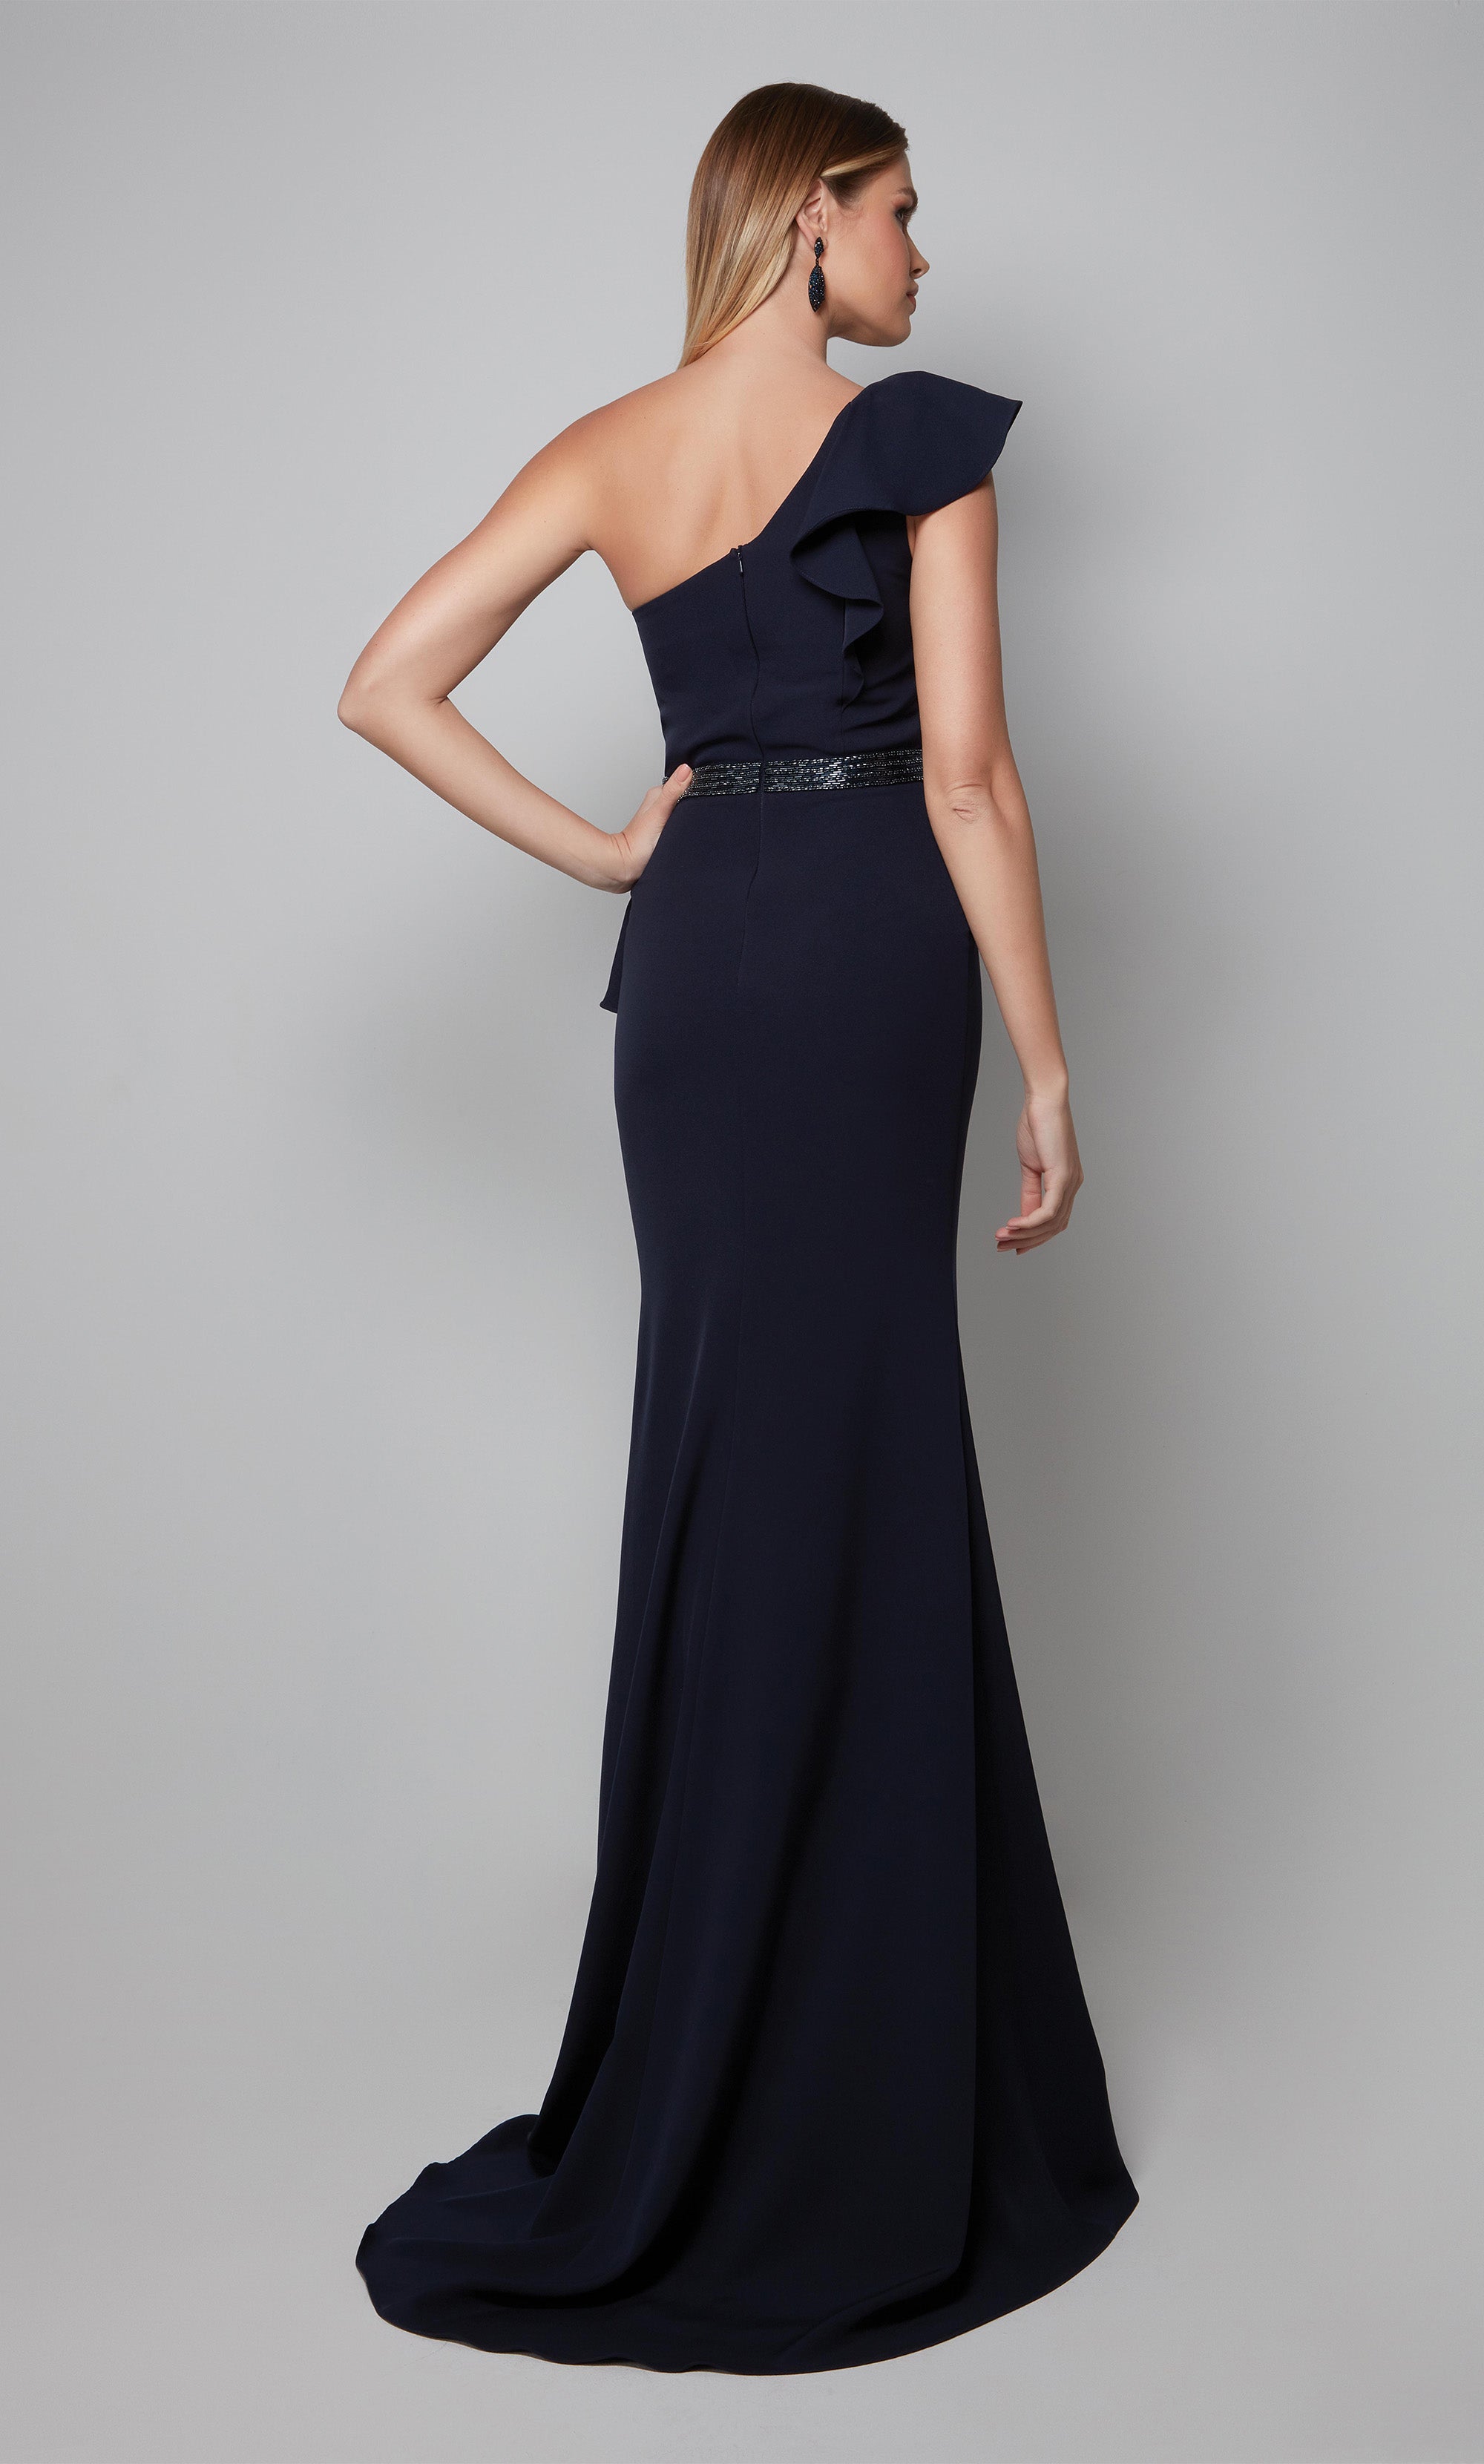 Midnight blue one shoulder peplum dress with ruffle detail, faux beaded belt, and side slit. Color-SWATCH_27577__MIDNIGHT